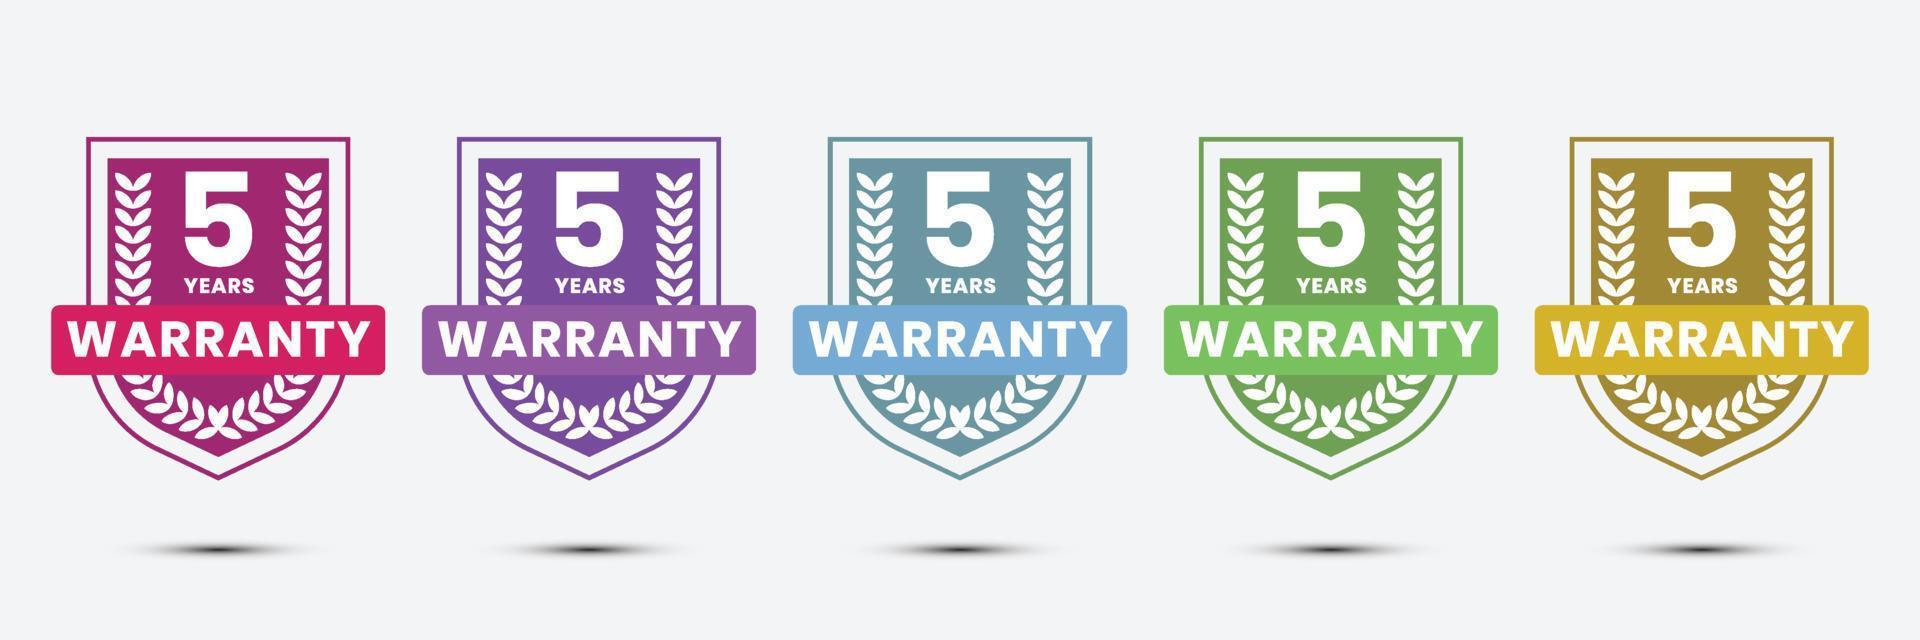 5 years Warranty badge design with shield shape vector